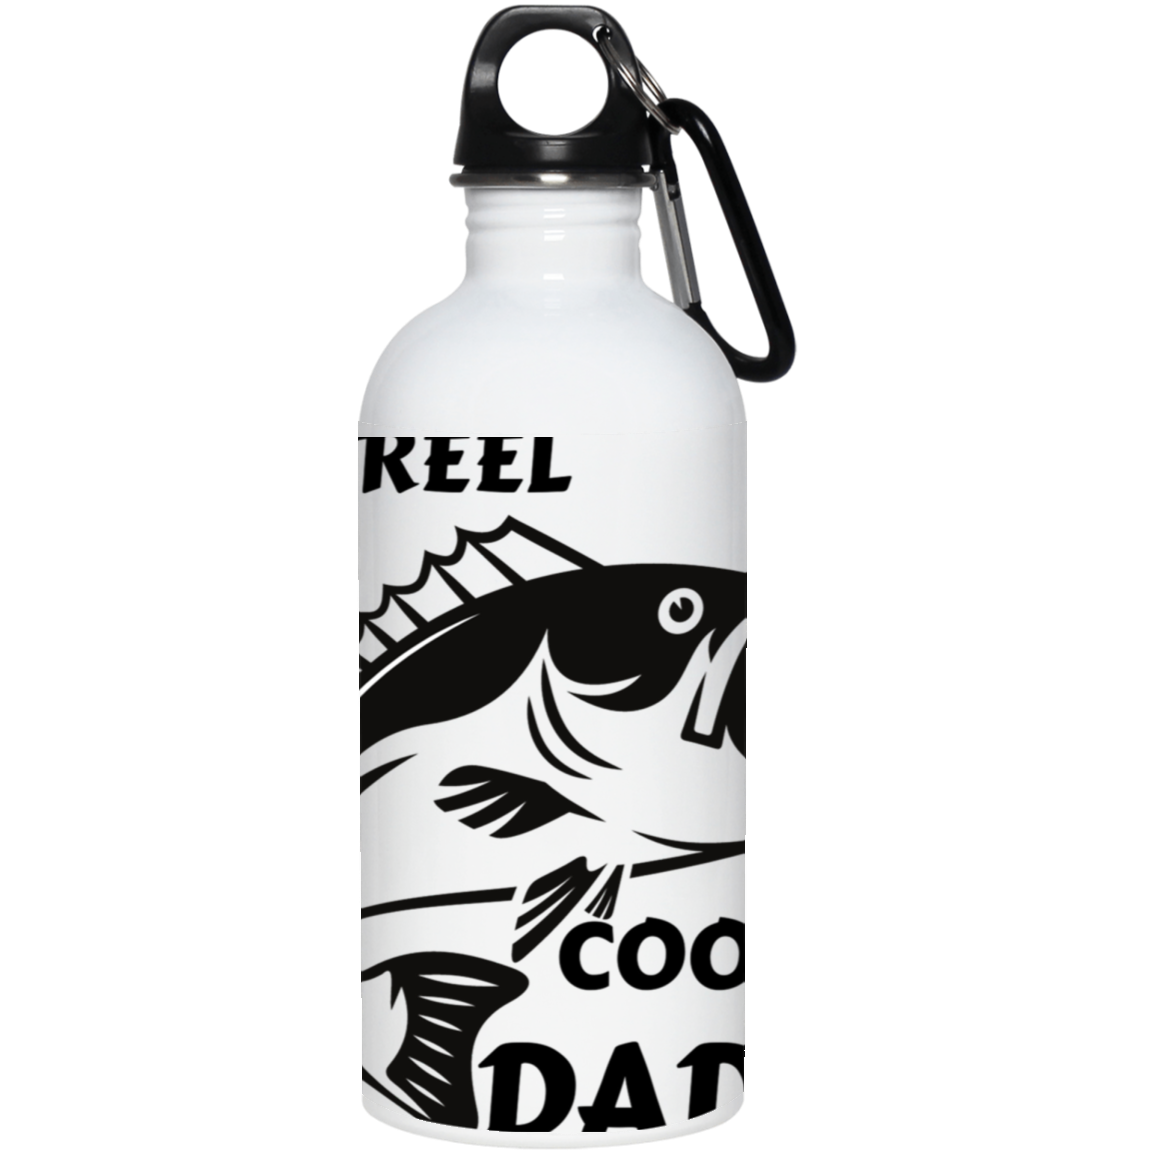 COOL (3) 23663 20 oz. Stainless Steel Water Bottle